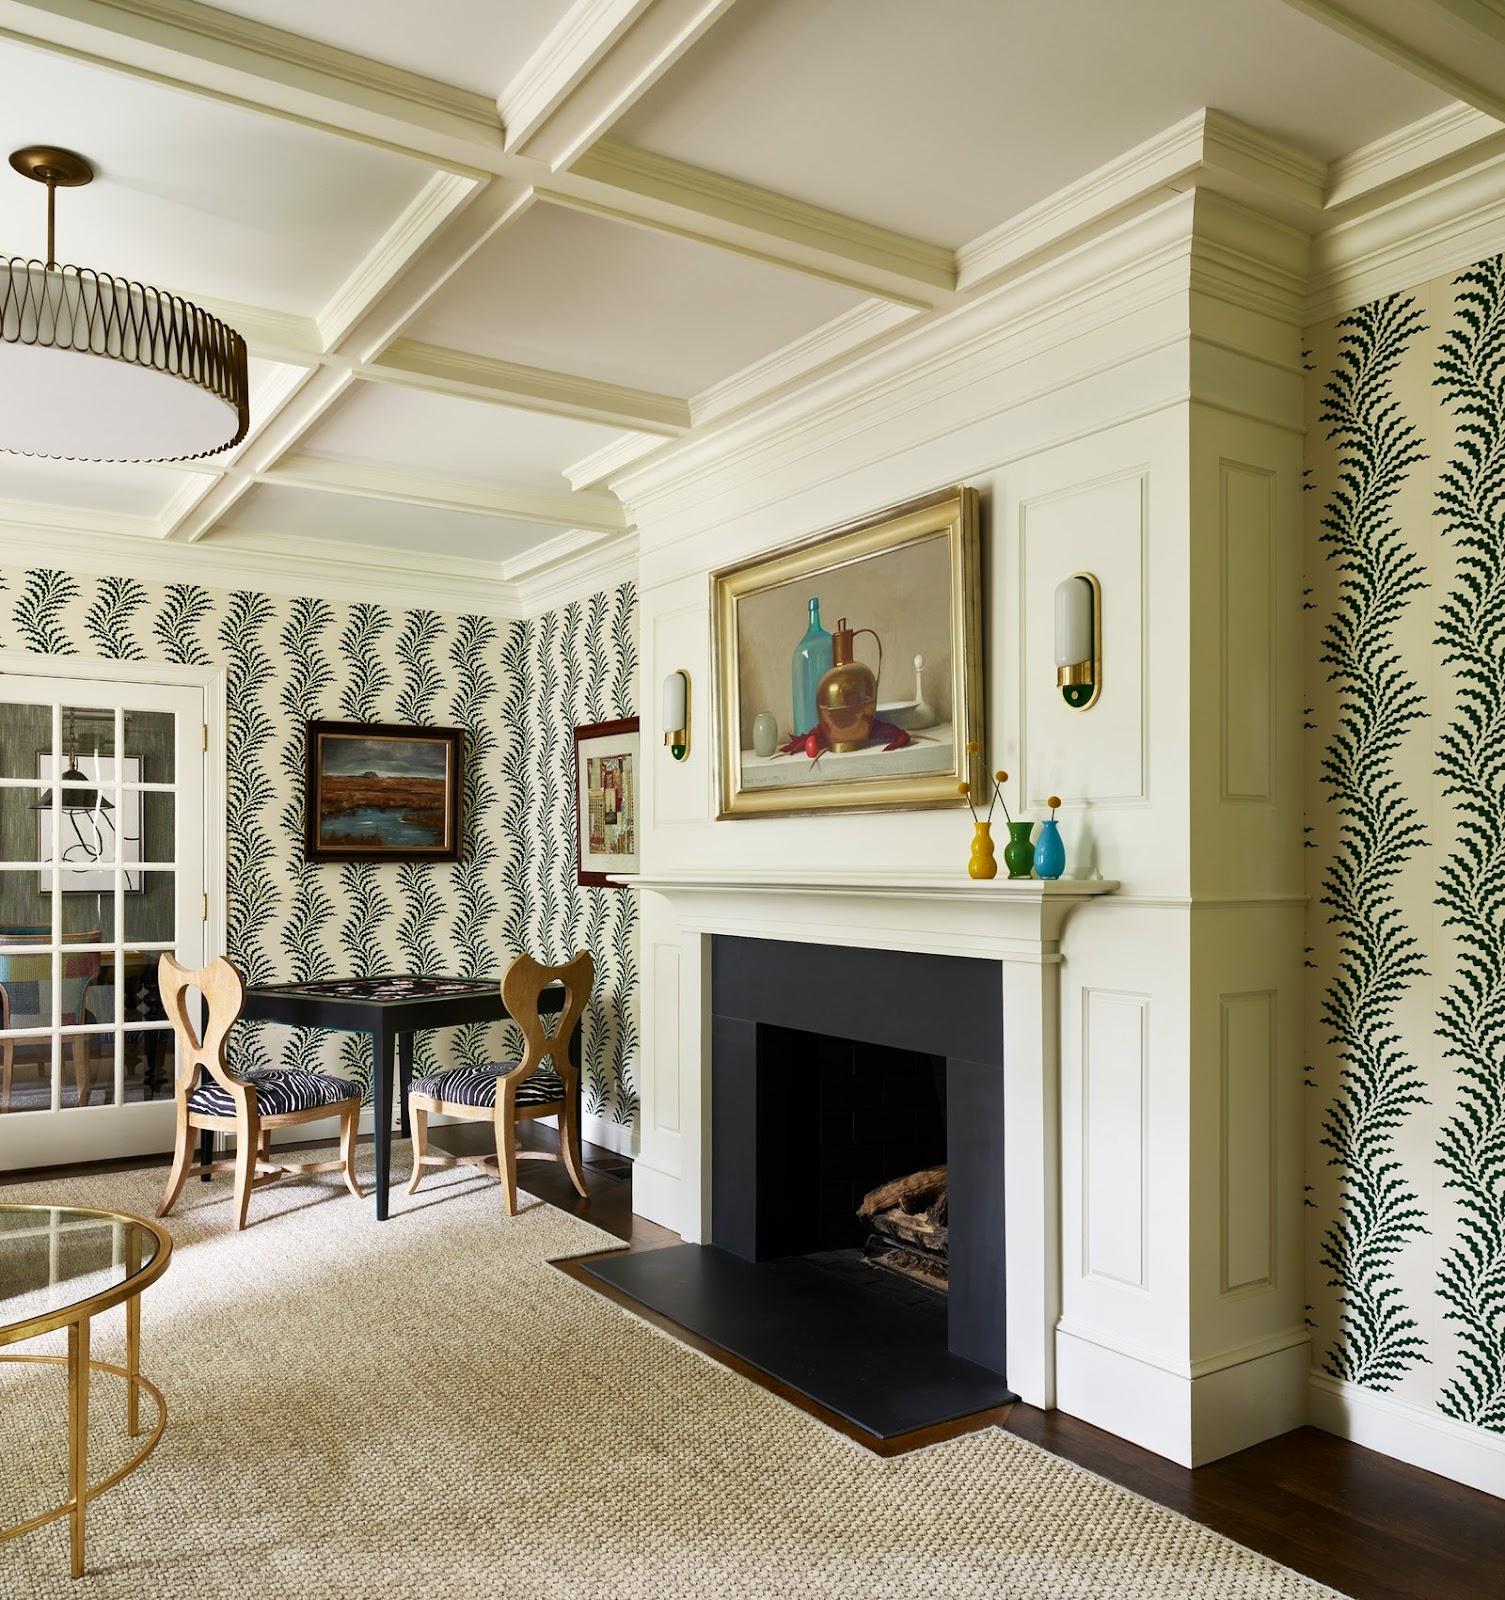 Liz Caan uses wainscoting on the surround and mantel.